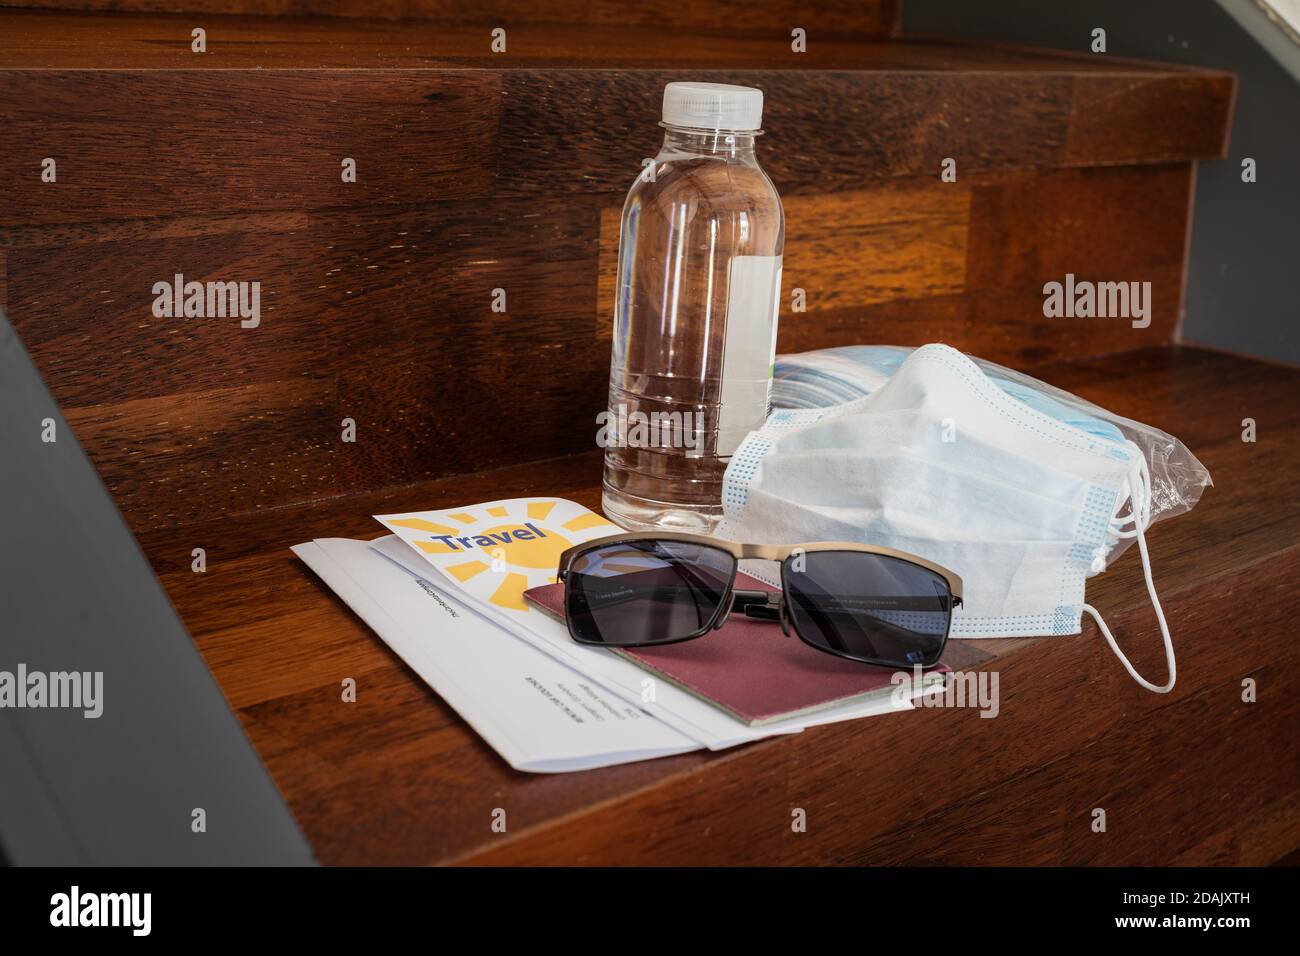 Traveling in times of corona virus concept: A pack of masks, a used mask, a bottle of disinfectant, a passport, travel documents, sunglasses and trave Stock Photo